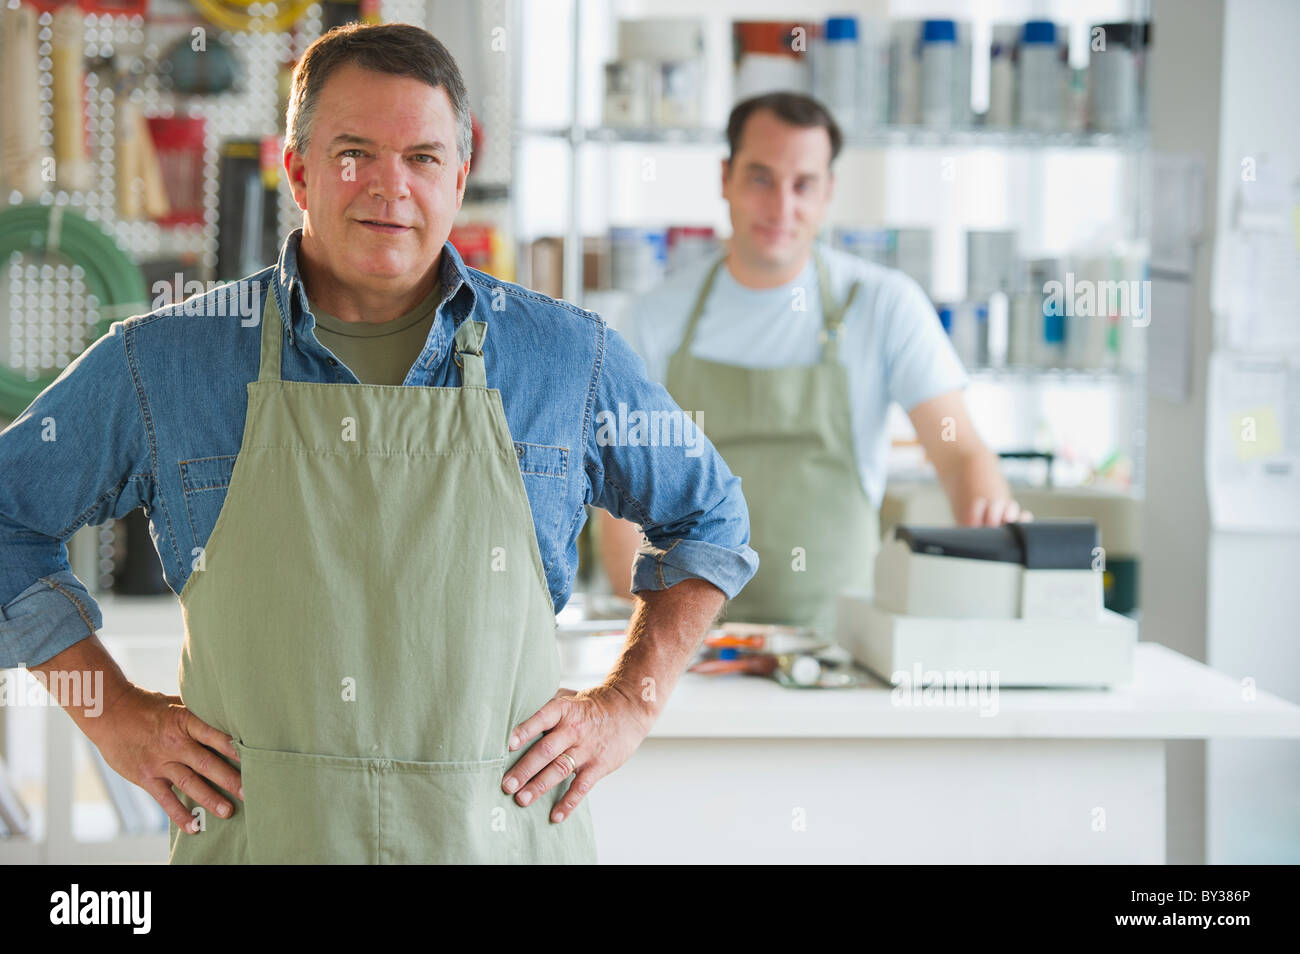 USA, New Jersey, Jersey City, Portrait of hardware shop owner and assistant Stock Photo